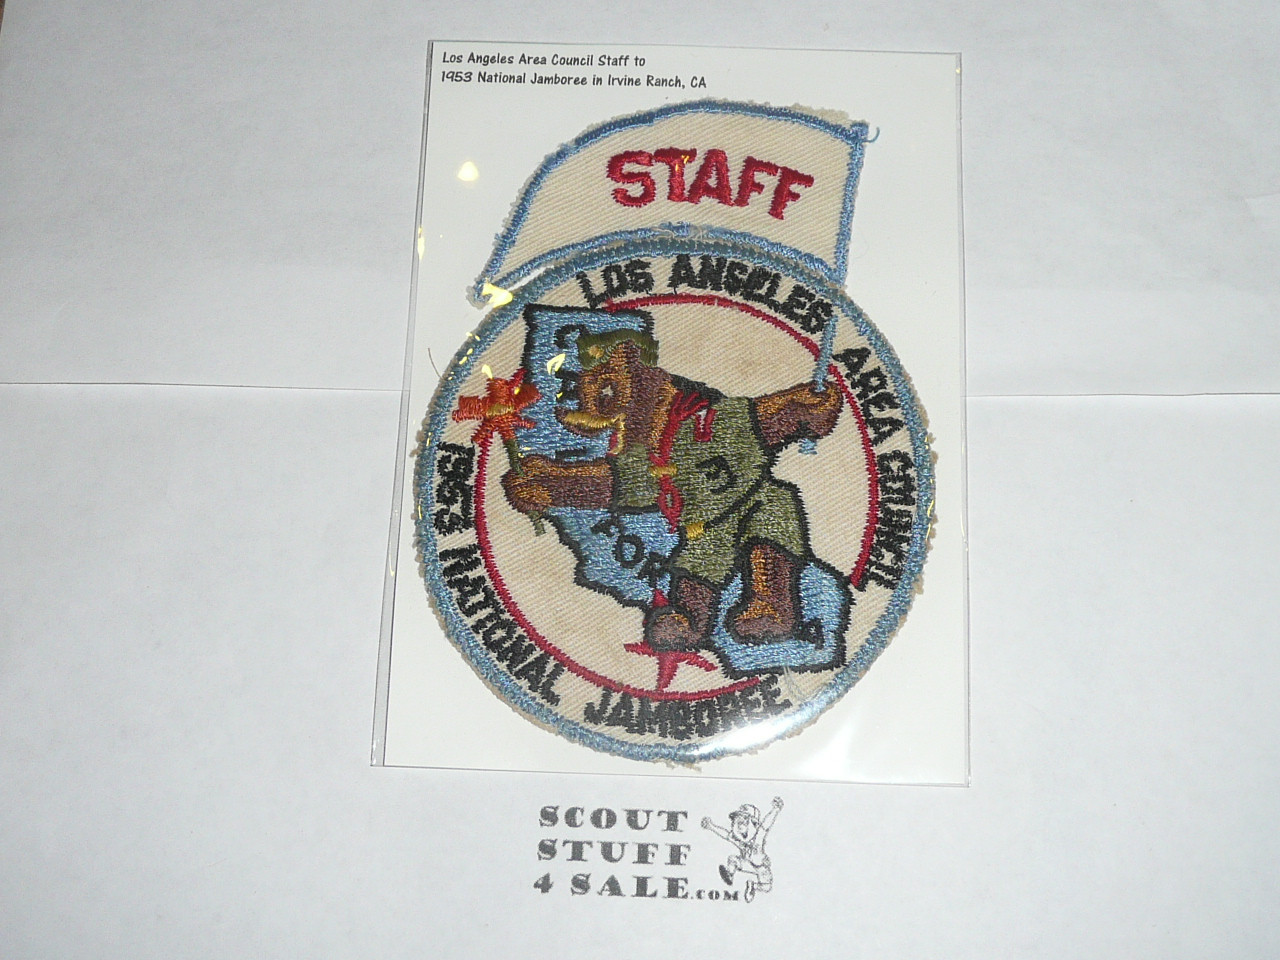 1953 National Jamboree JSP - Los Angeles Area Council, STAFF RARE, patch was sewn but strip appears MINT